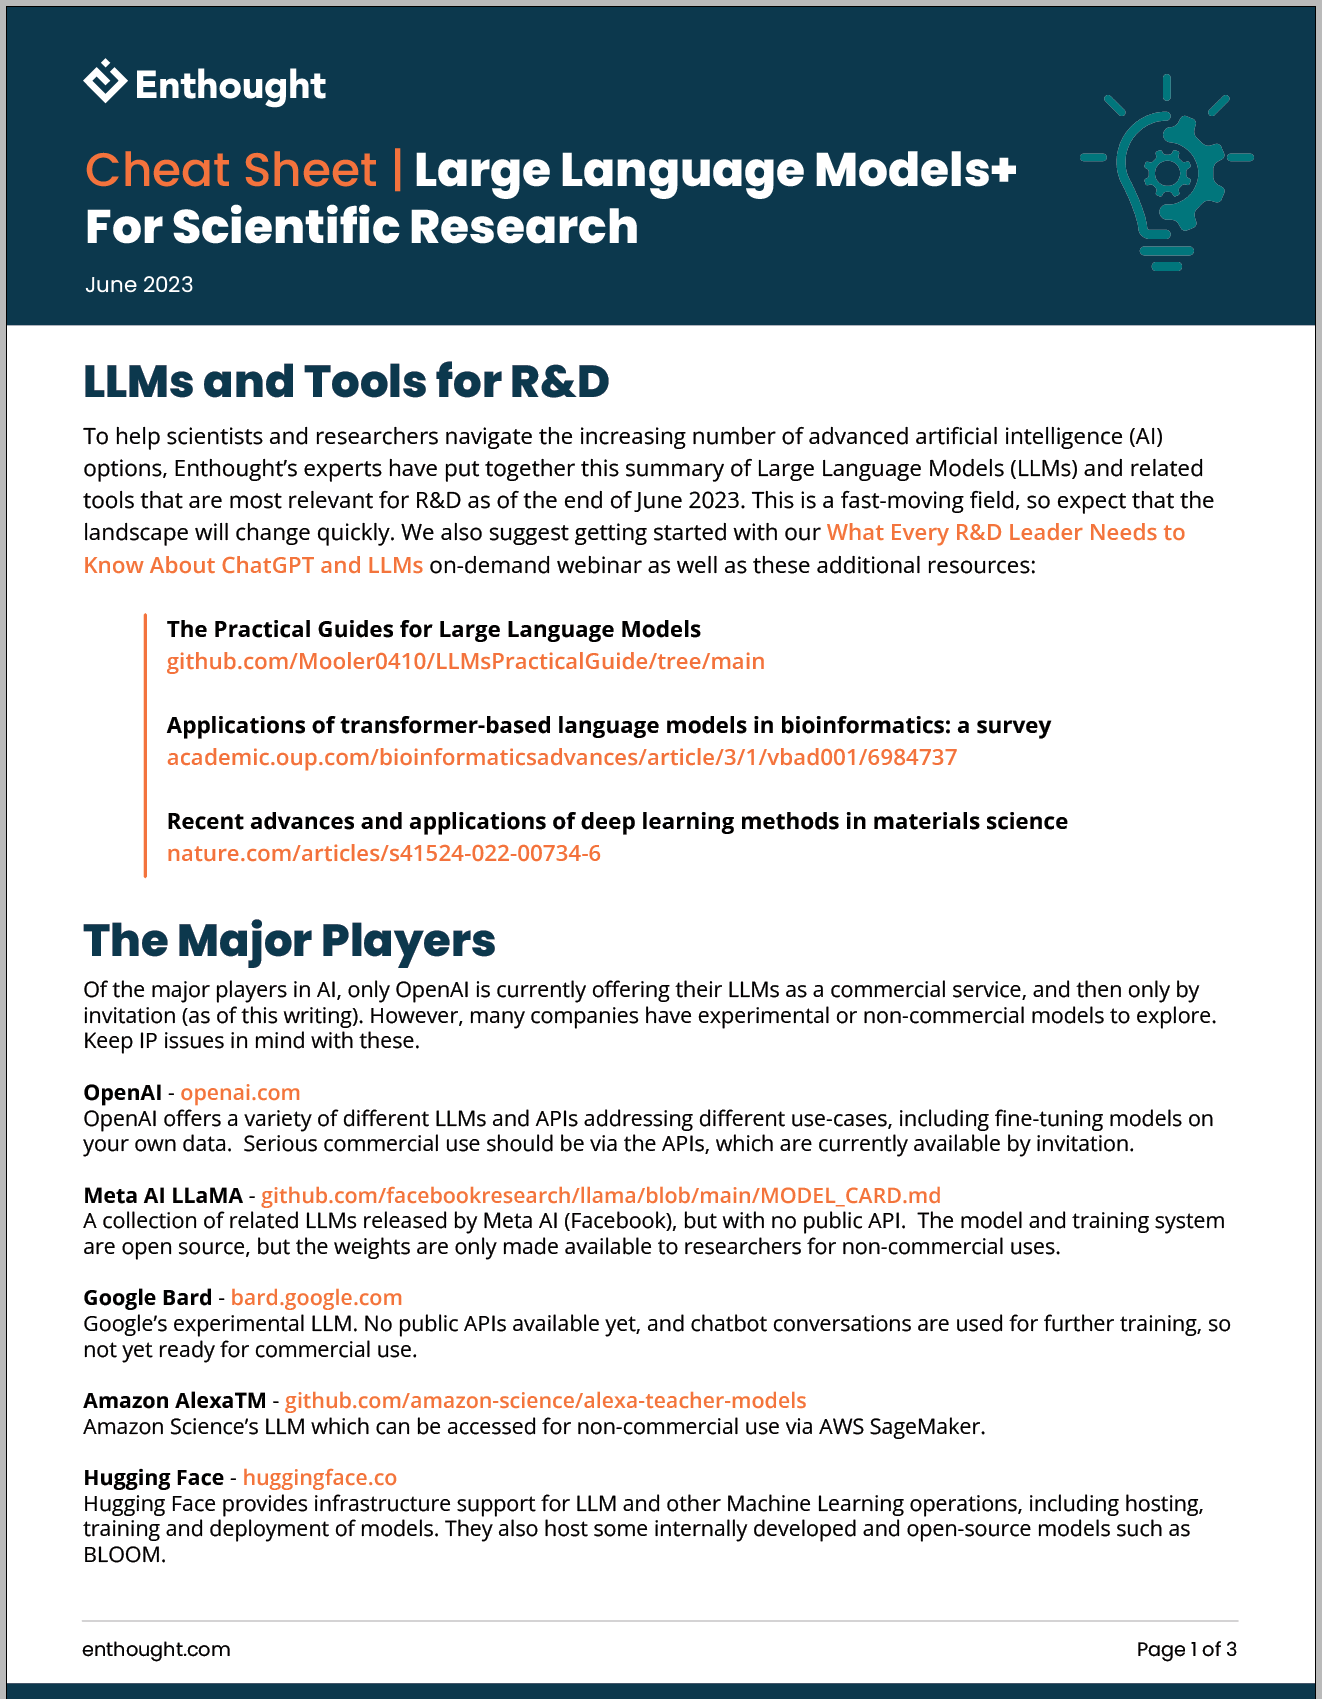 Enthought | Cheat Sheet: Large Language Models+ for Scientific Research